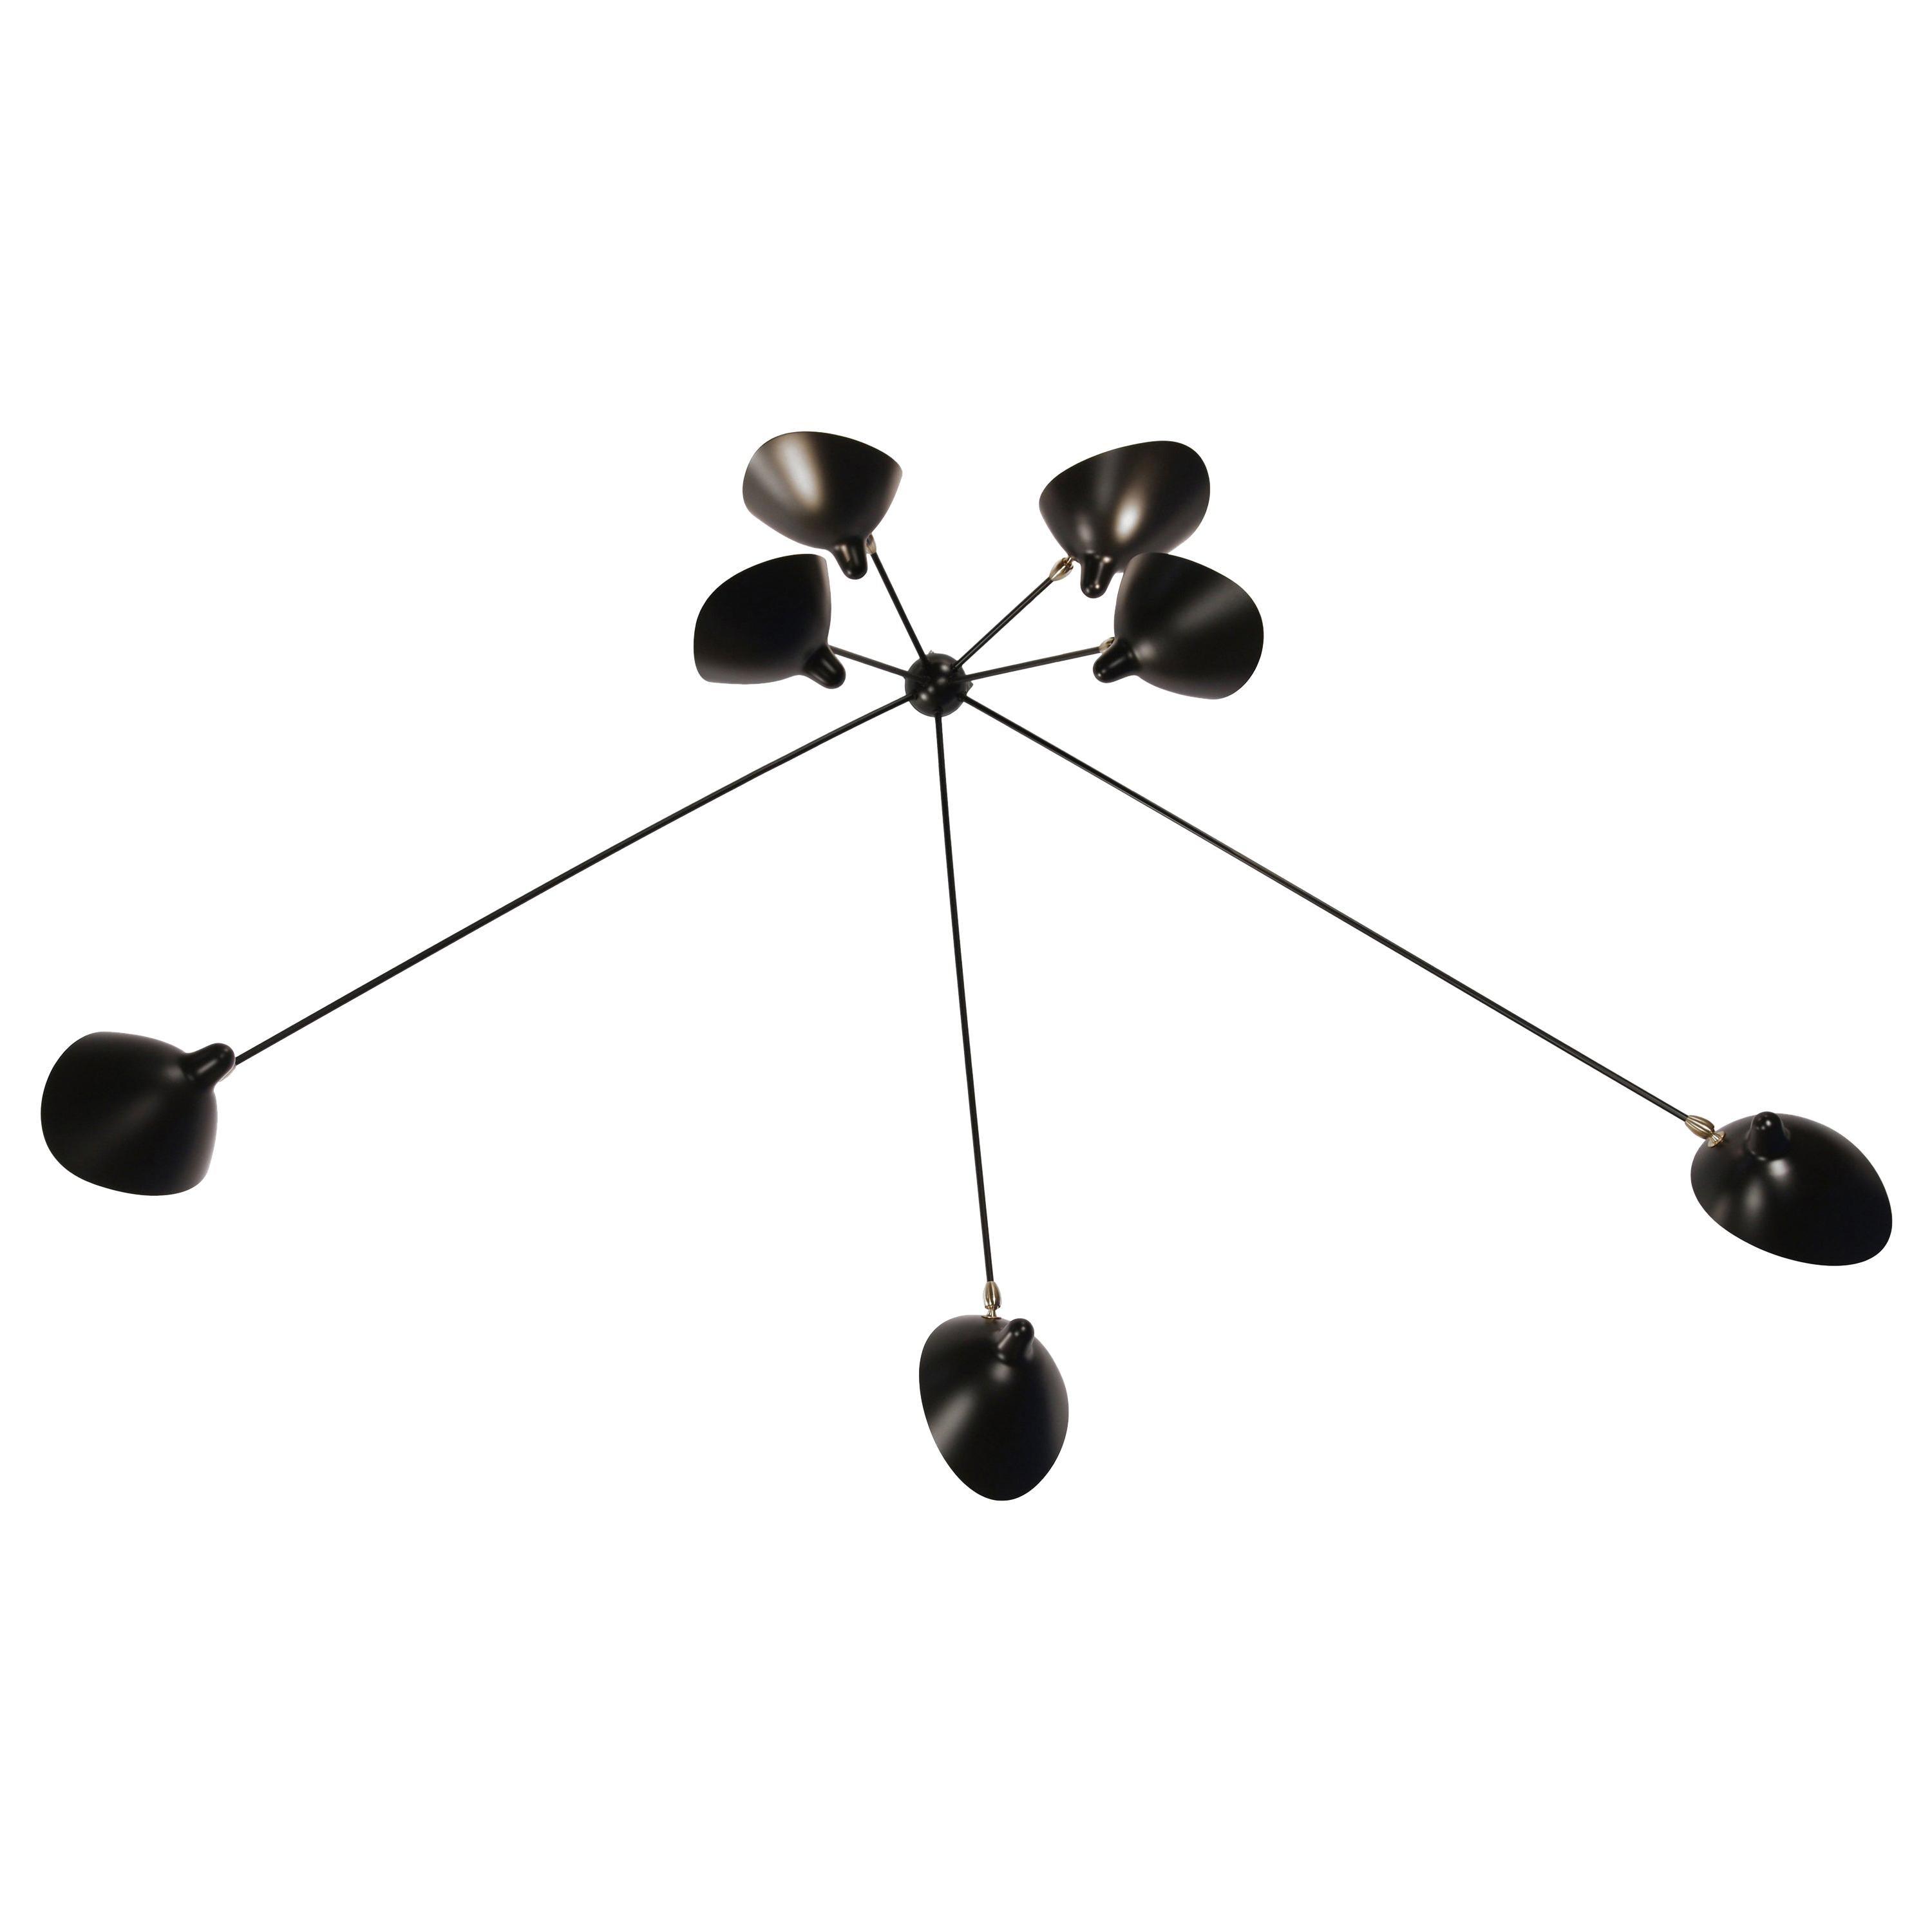 Serge Mouille Mid-Century Modern Black Seven Fixed Arms Spider Wall Ceiling Lamp For Sale